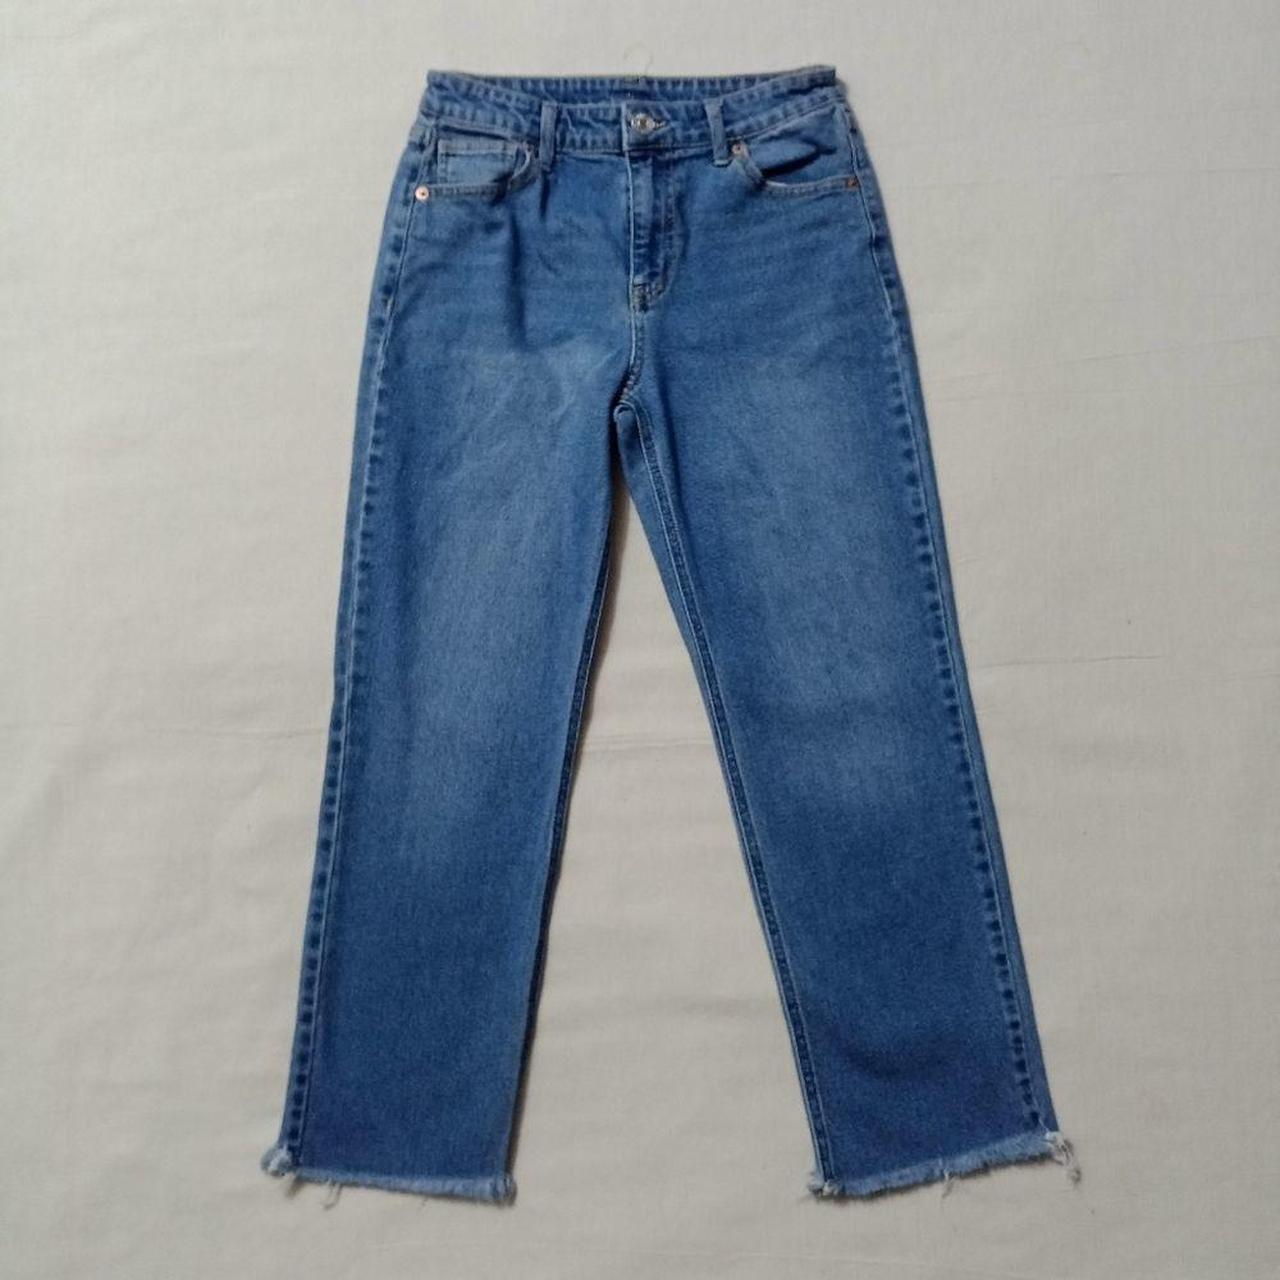 WILD FABLE JEANS, preloved item-no flaws, medium wash